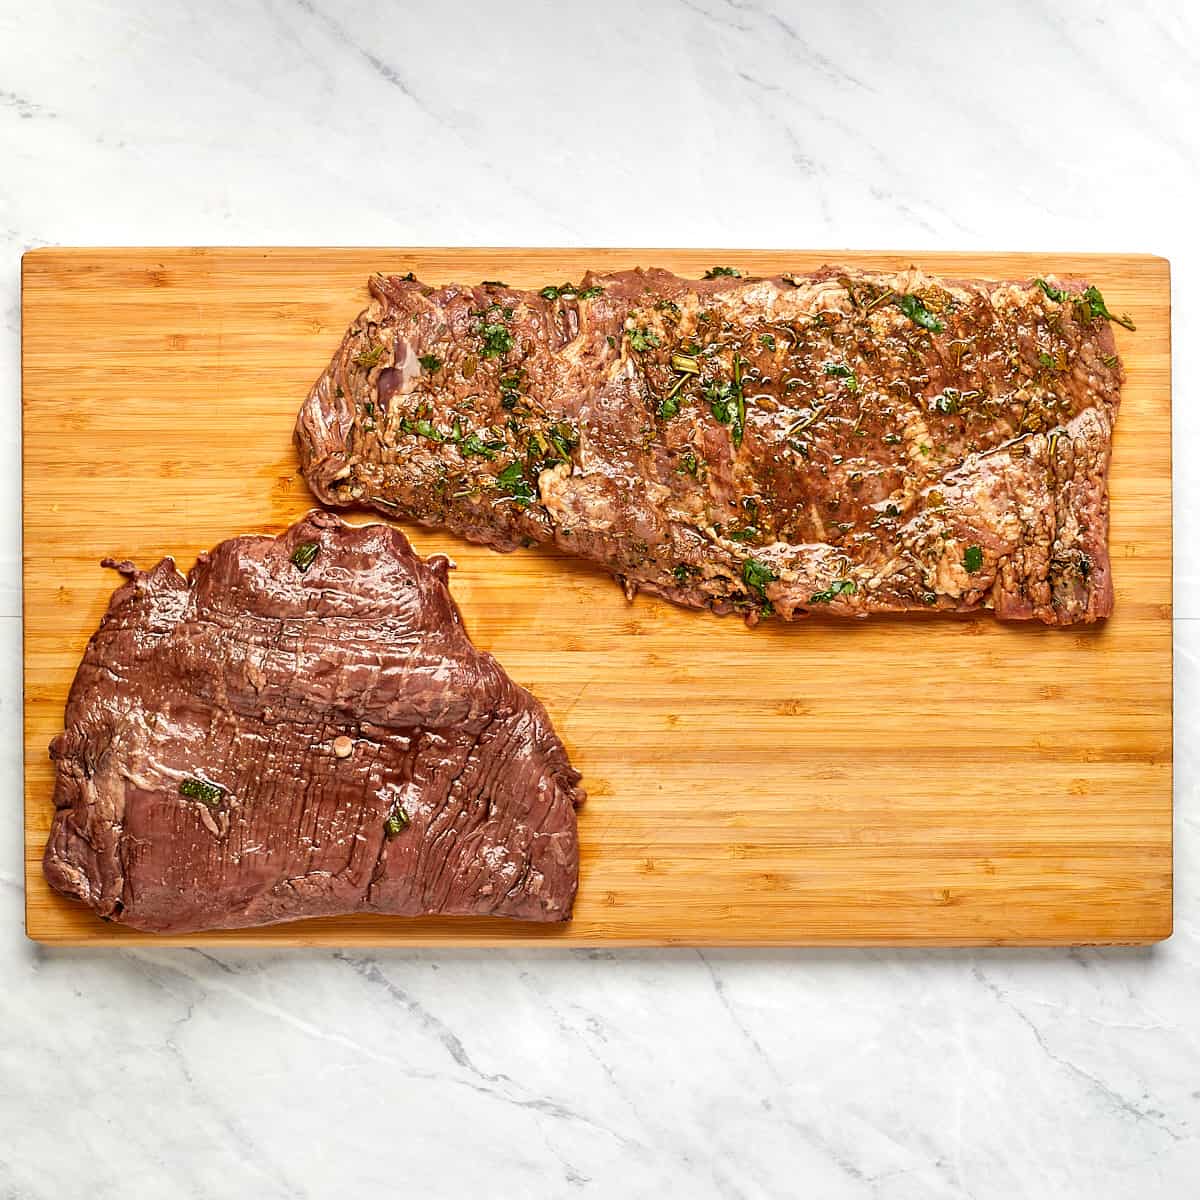 uncooked marinated flank steak and skirt steak on a wood cutting board